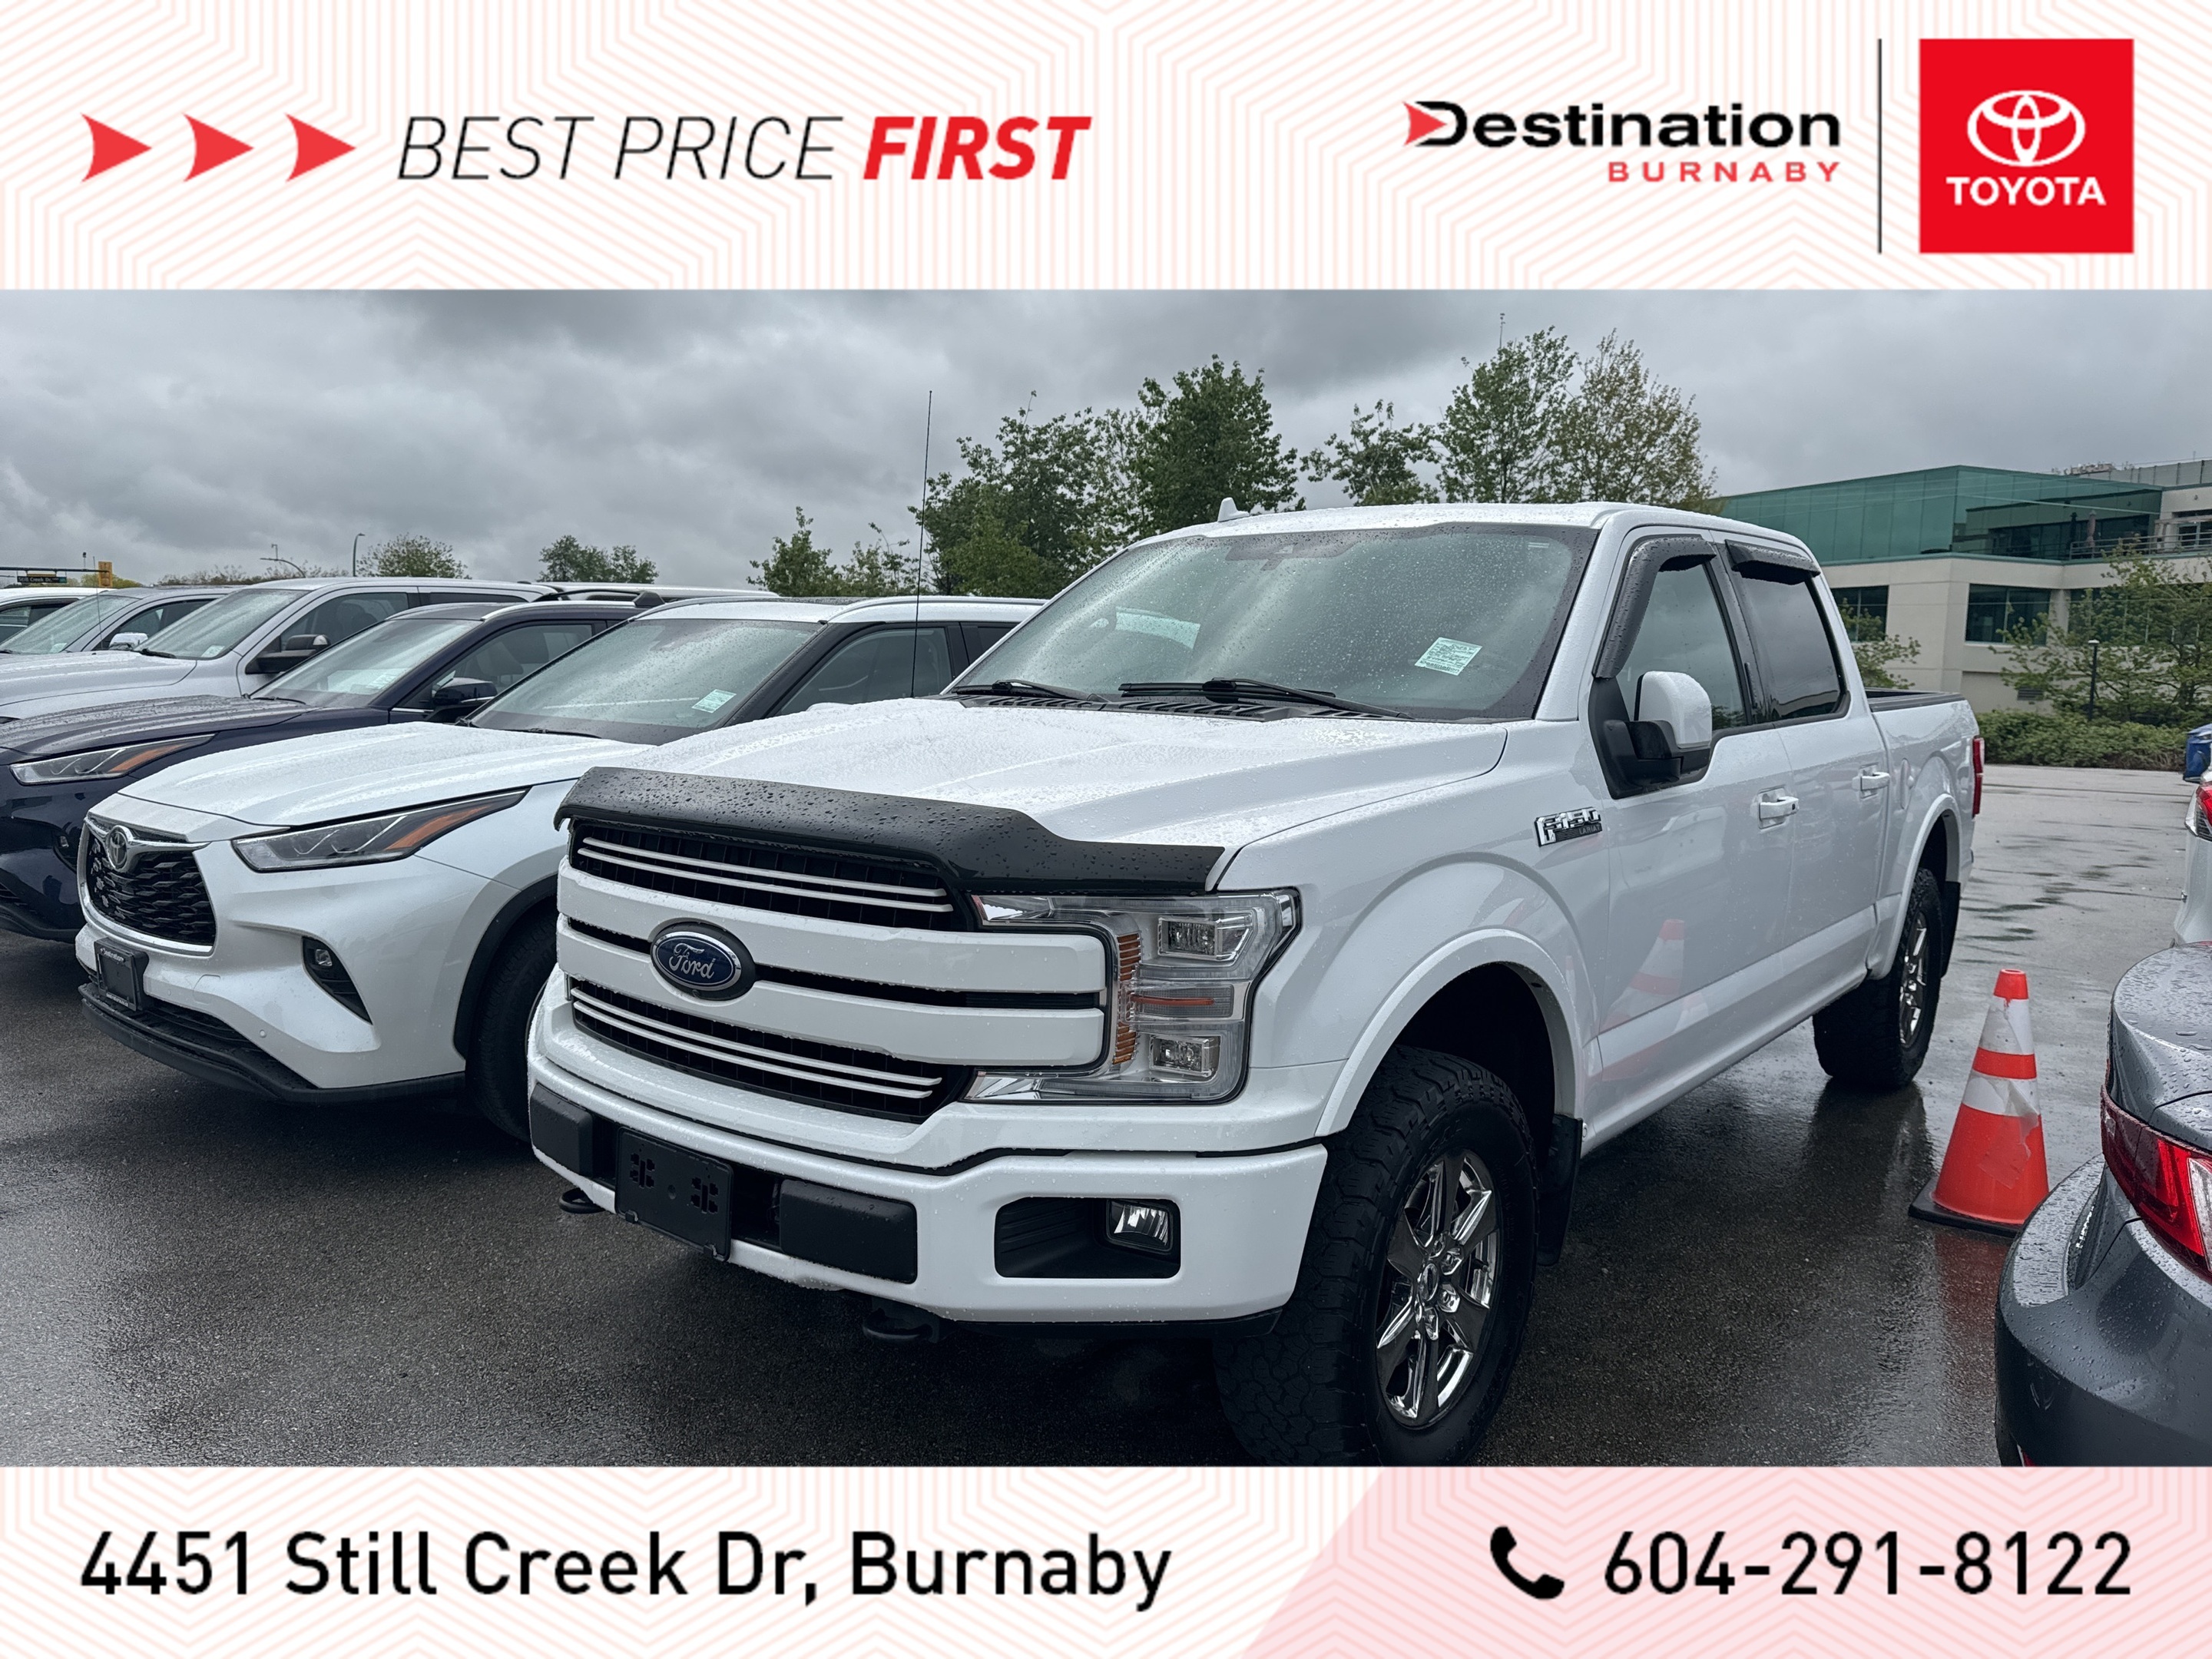 2019 Ford F-150 Supercrew Lariat - Local No Accidents 1owner!